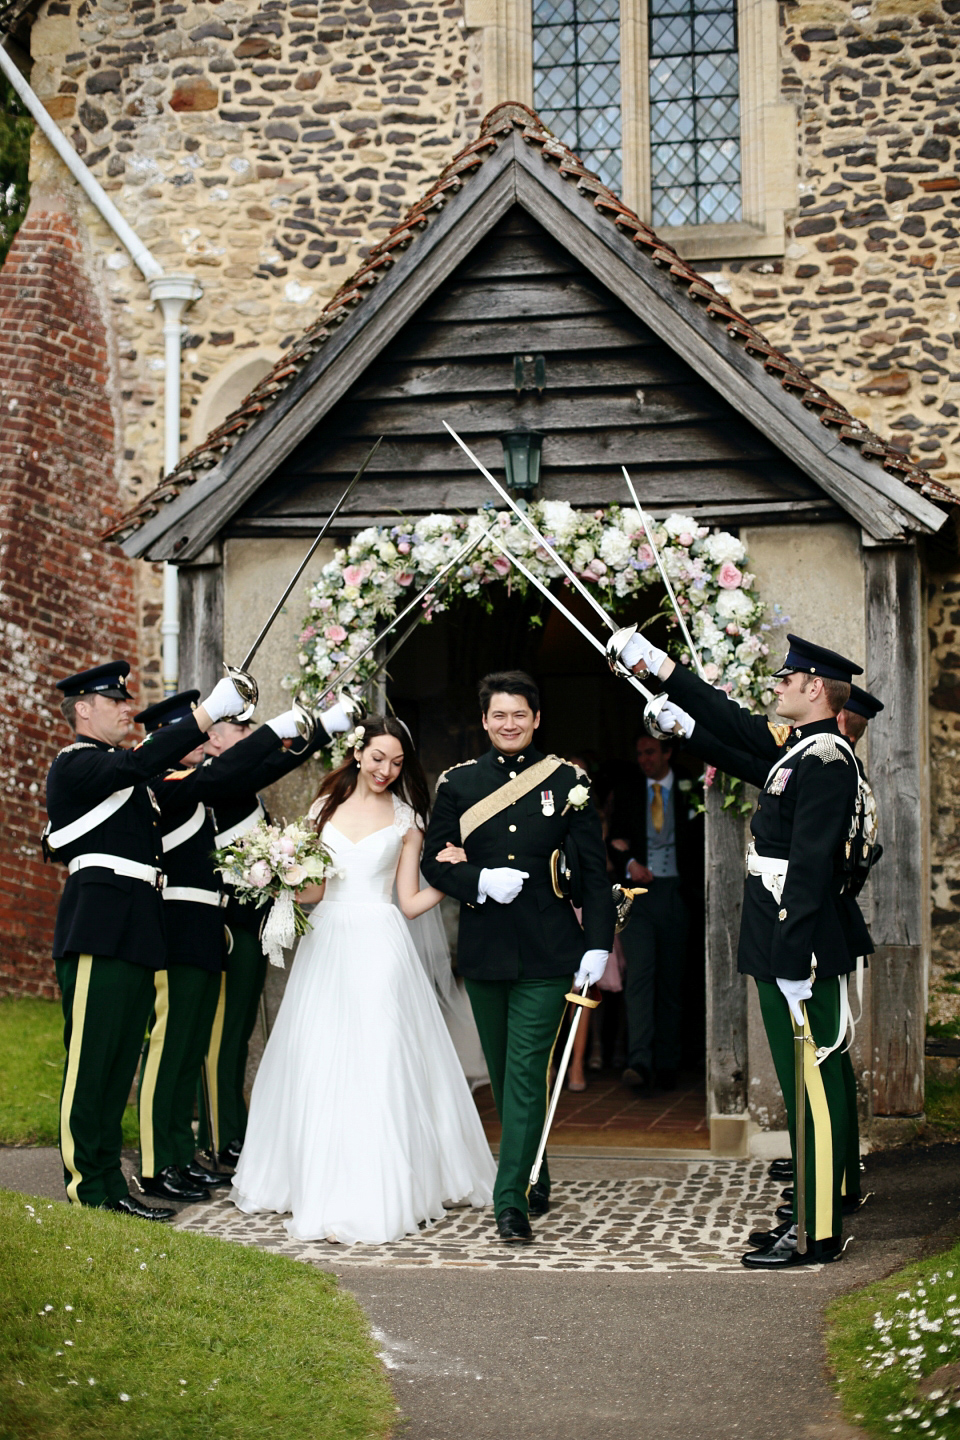 Bride Chloe wore a Suzanne Neville gown which she purchased from Miss Bush Bridal in Surrey, for her military style wedding in the English countryside. Photography by Dasha Caffrey.